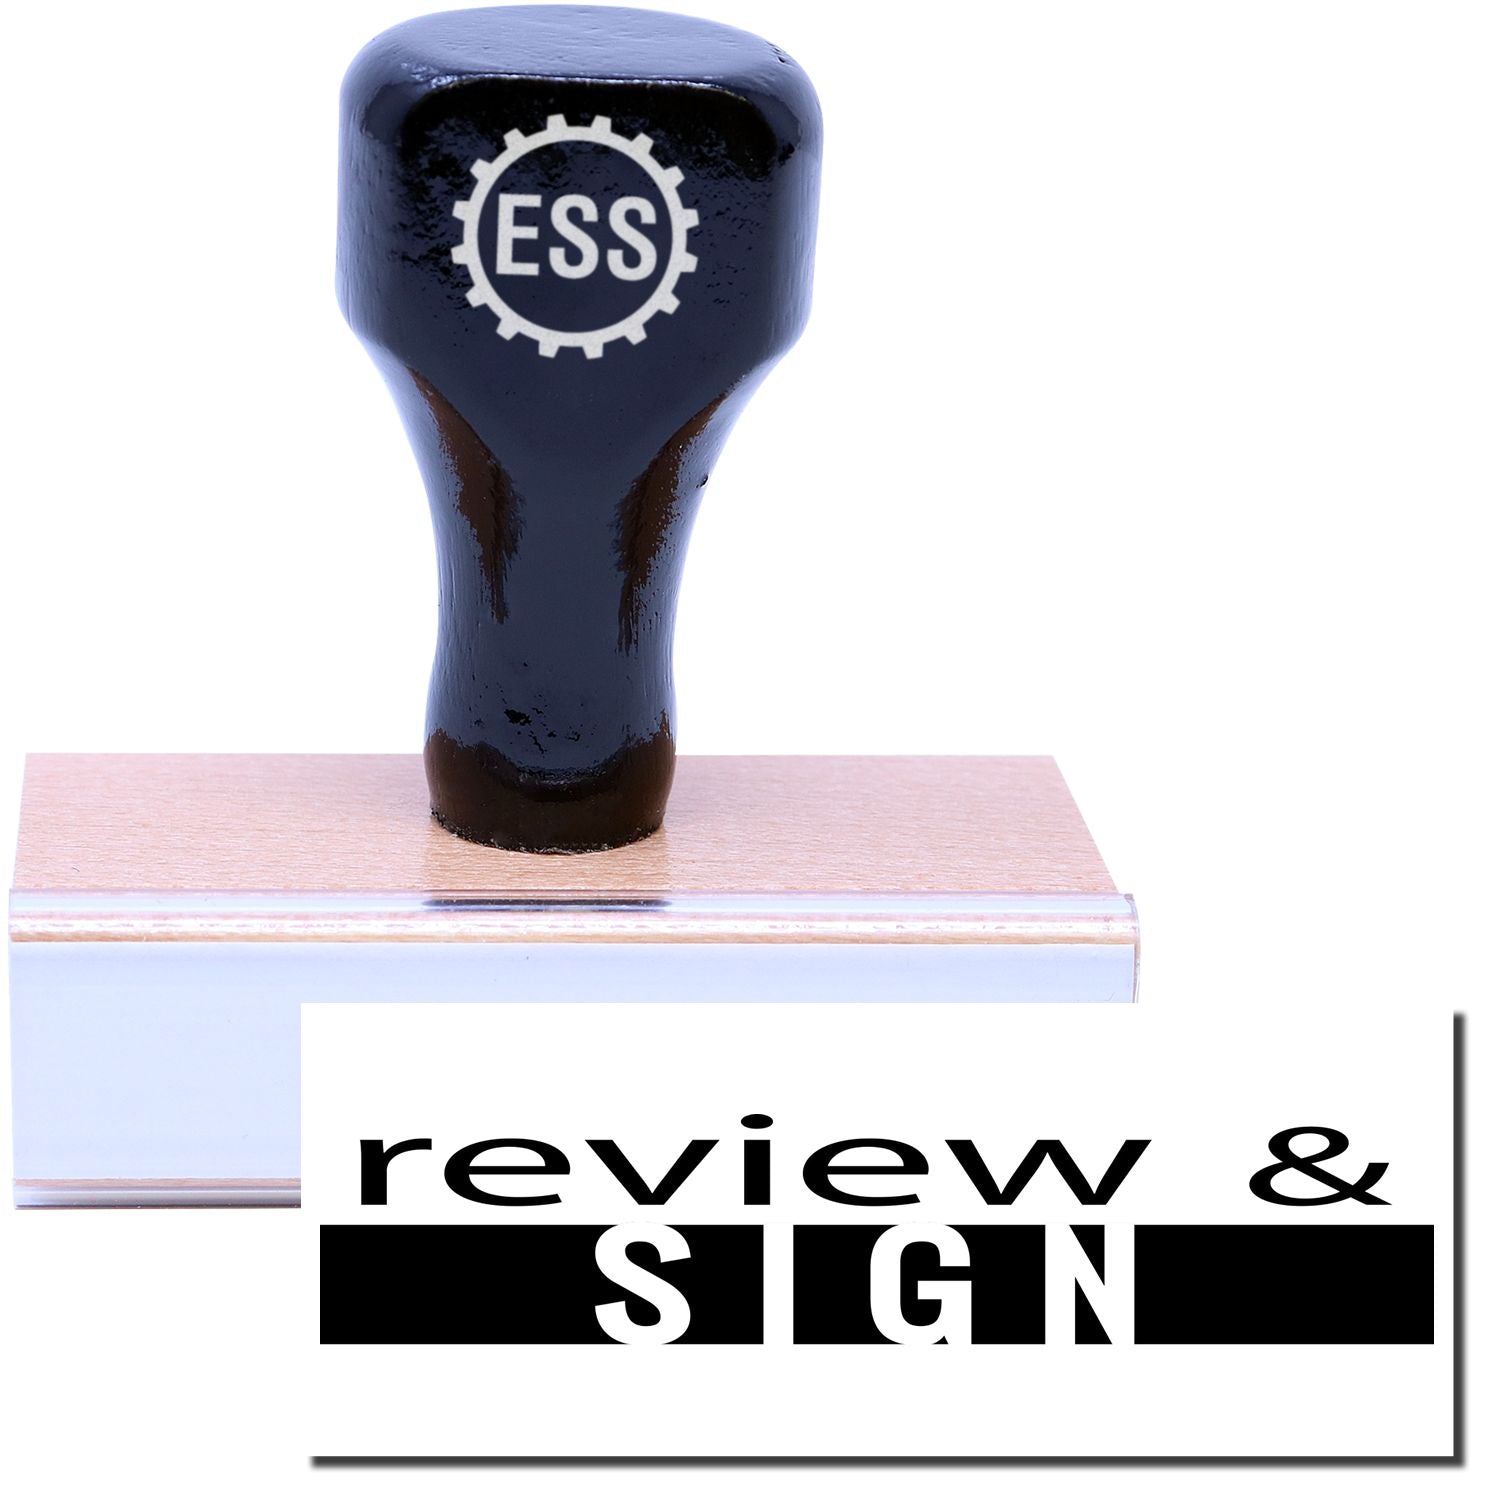 A stock office rubber stamp with a stamped image showing how the text "review & SIGN" in a large font and a dual-colored marking is displayed after stamping.